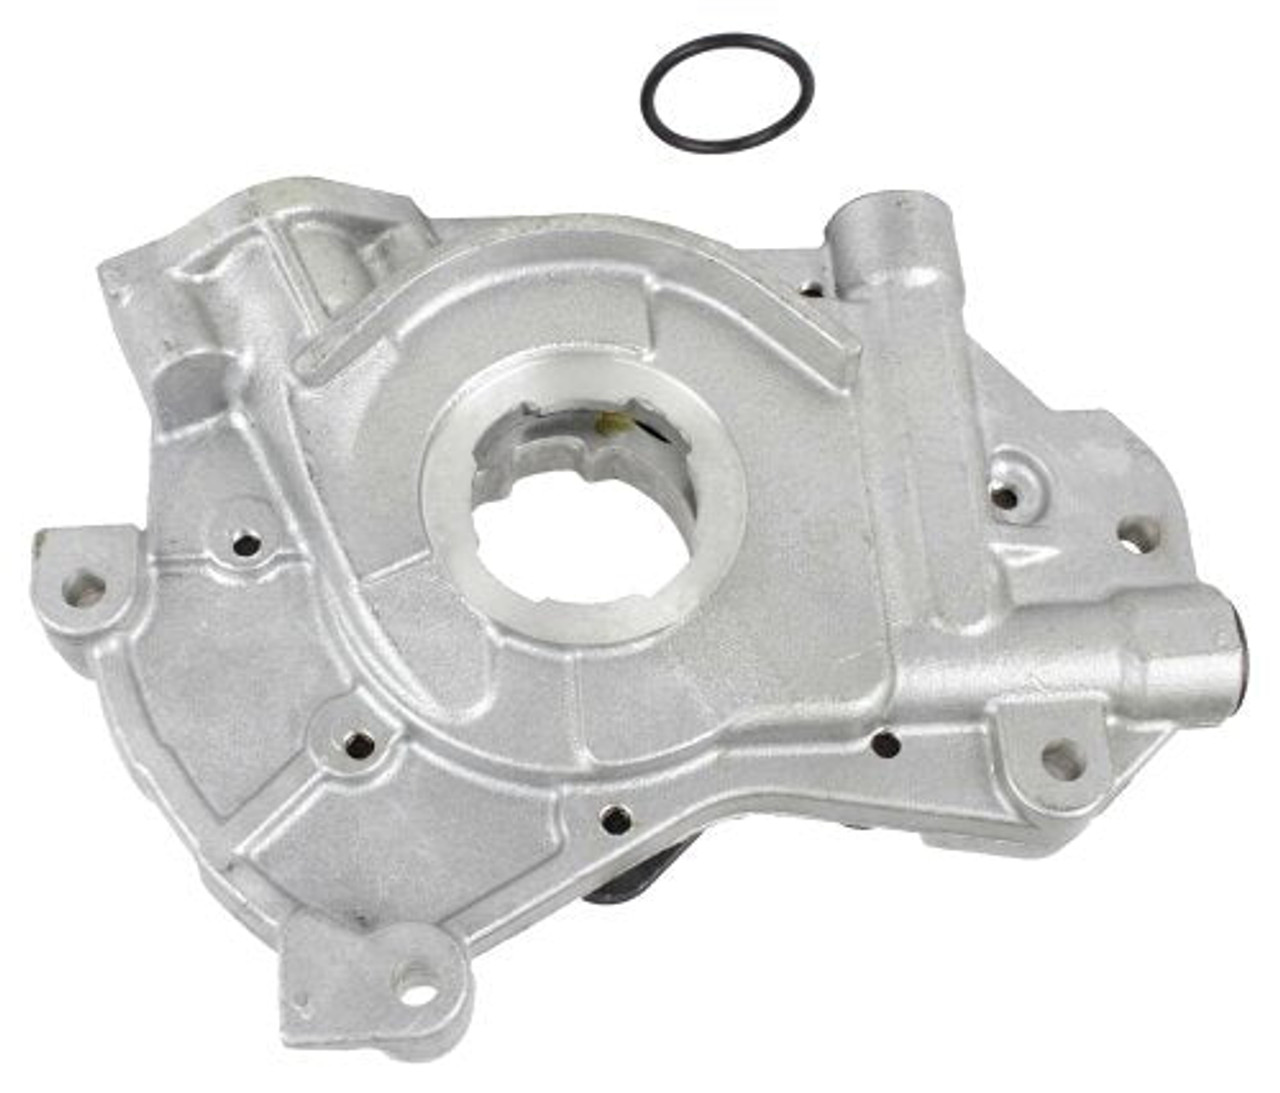 Oil Pump - 2010 Ford Mustang 4.6L Engine Parts # OP4179ZE46